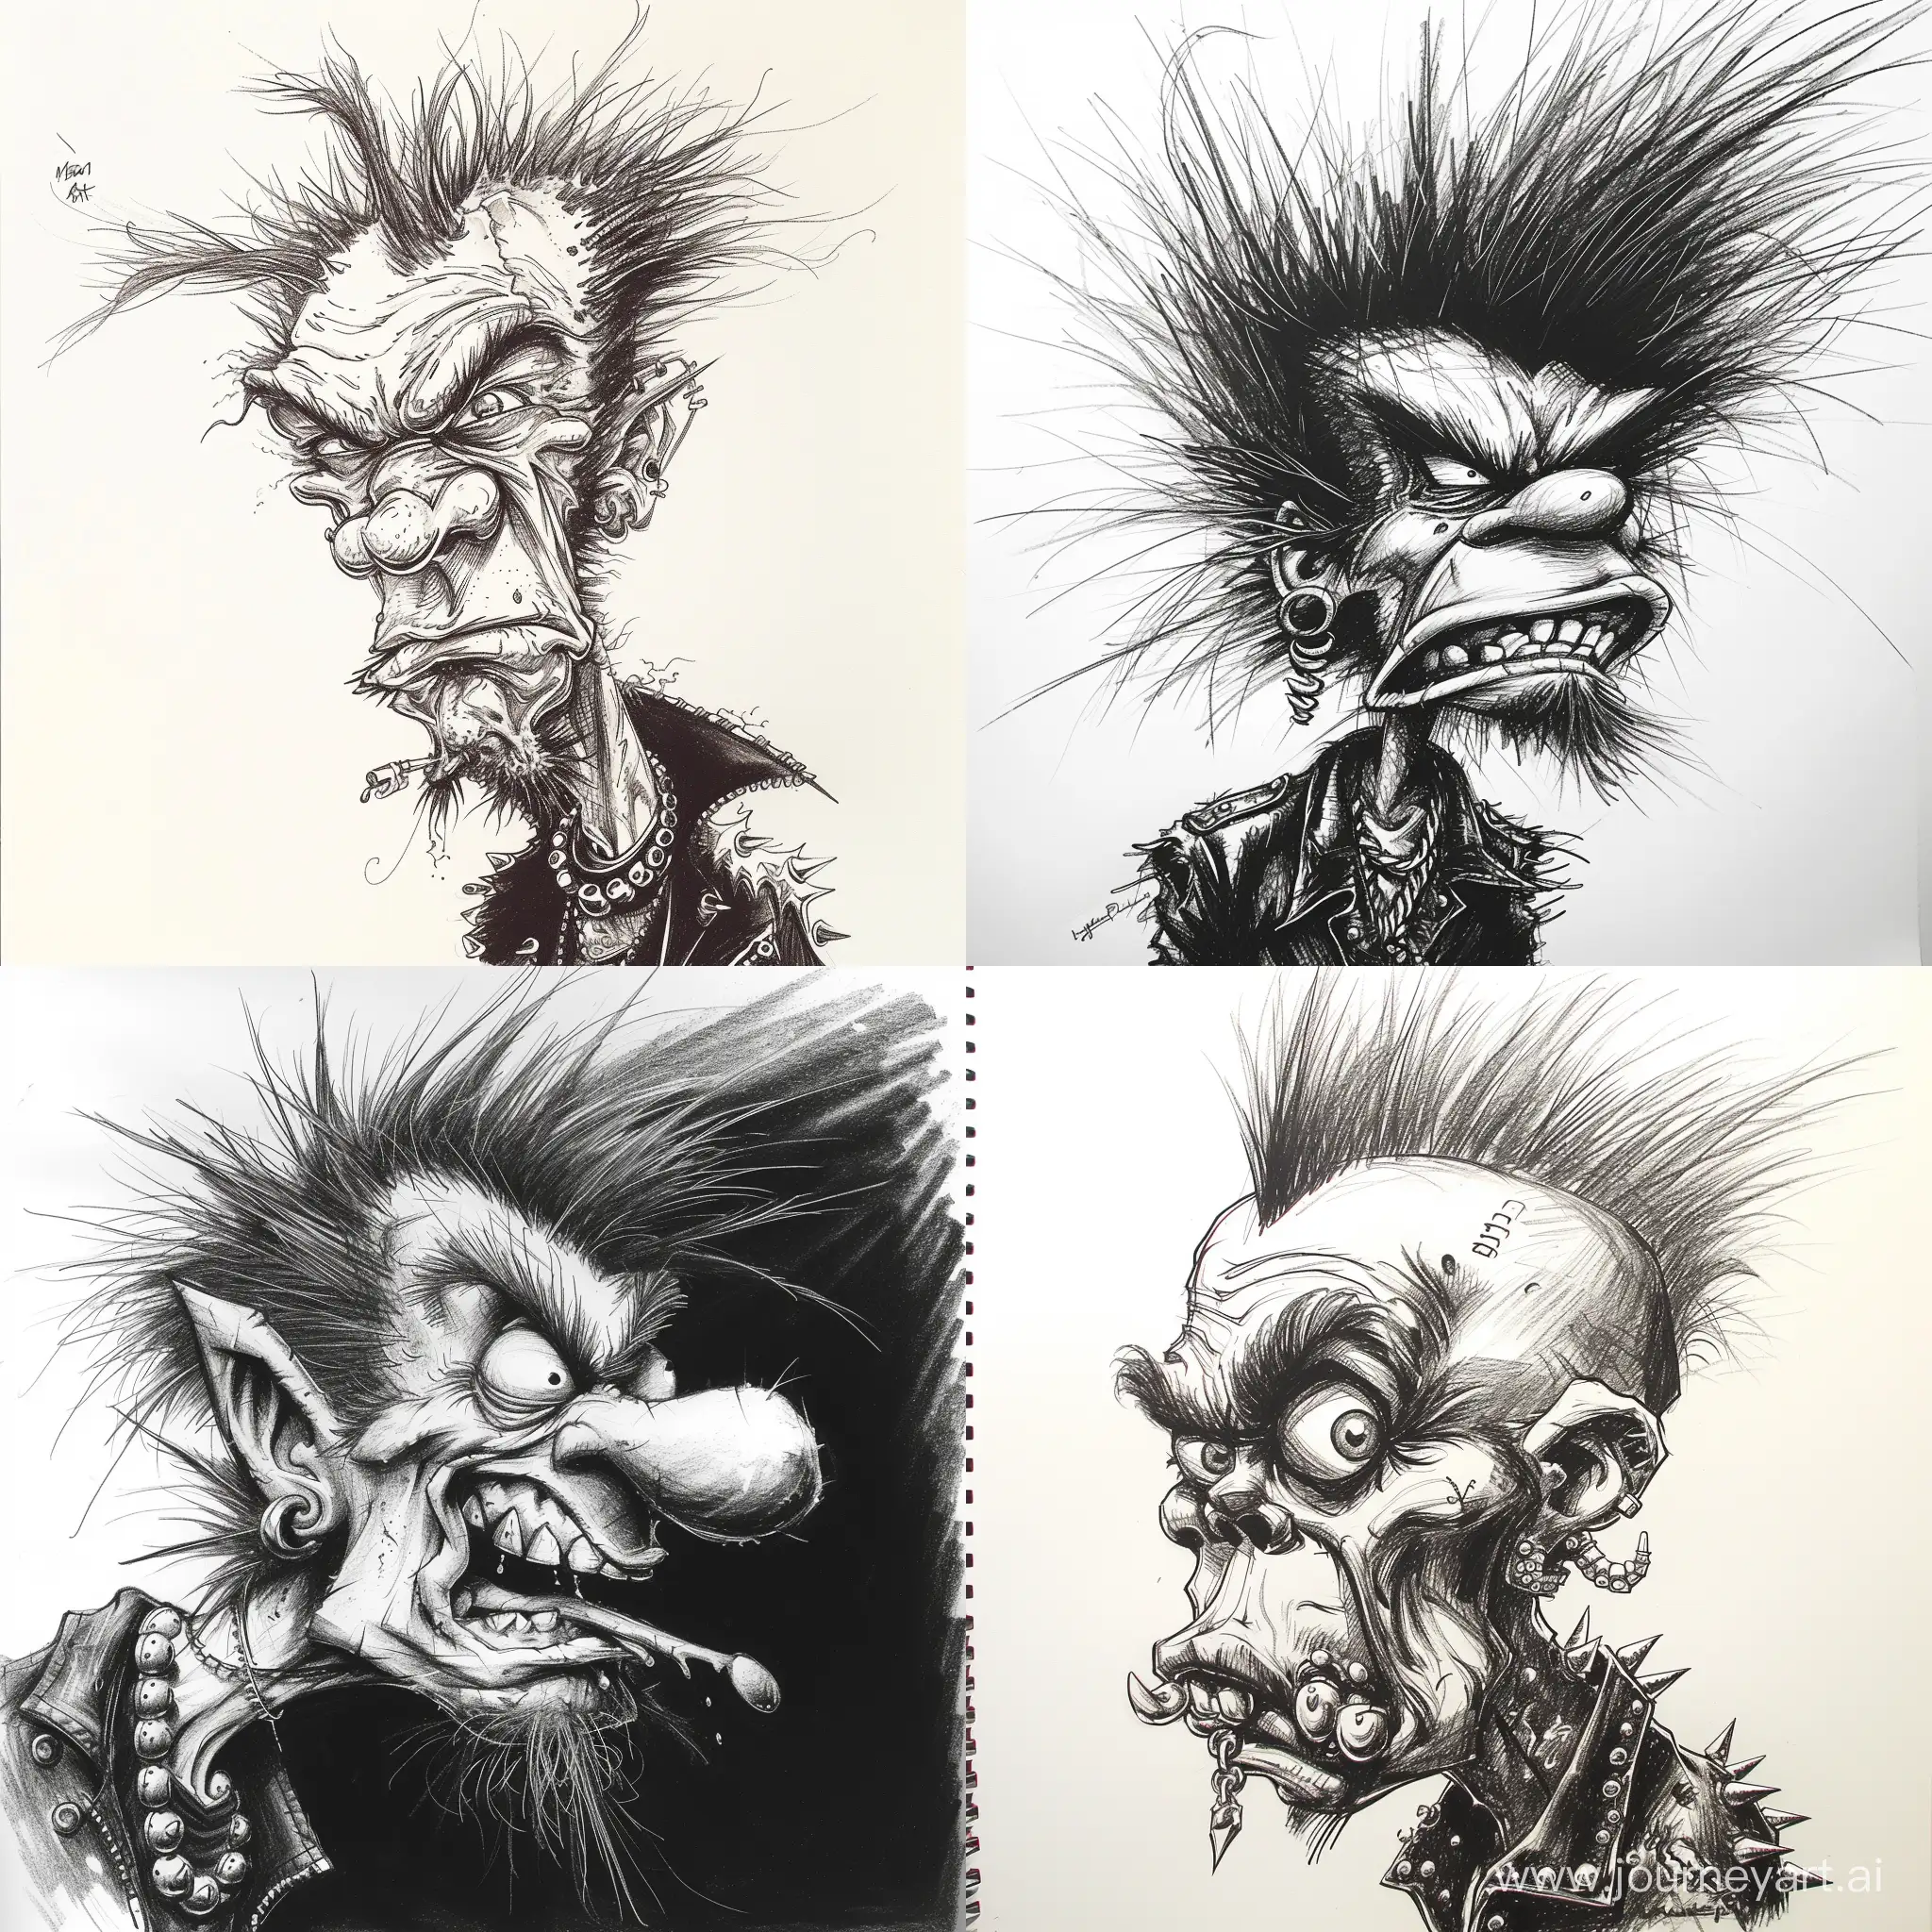 metalhead rock baby exaggerated features, extreme caricature conte drawing
